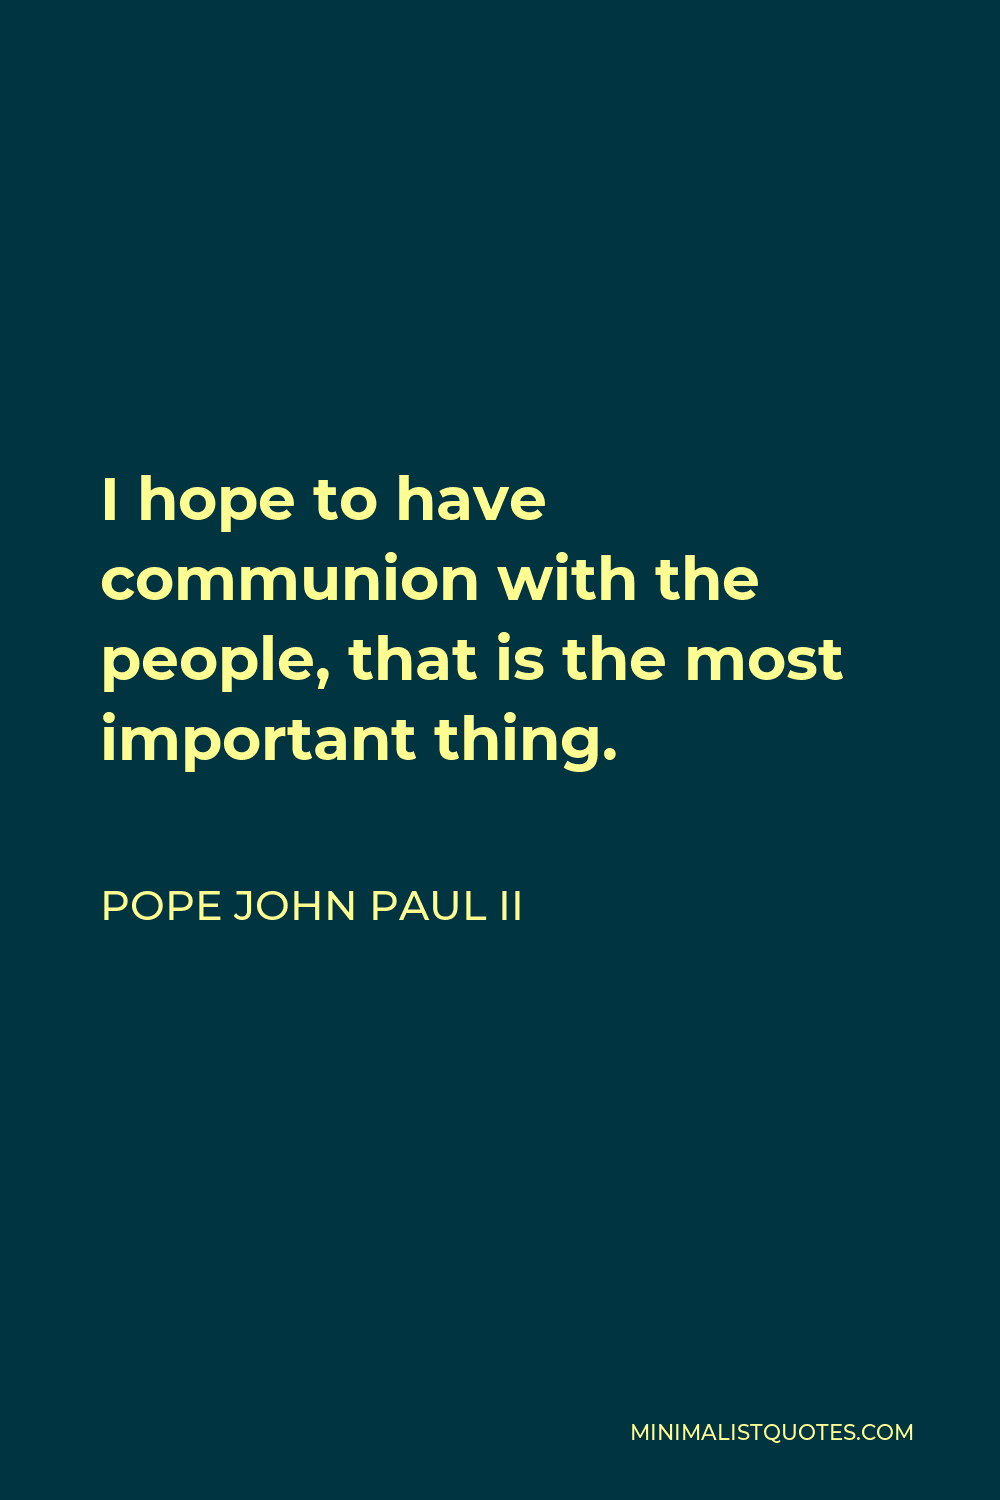 Pope John Paul II Quote - I hope to have communion with the people, that is the most important thing.